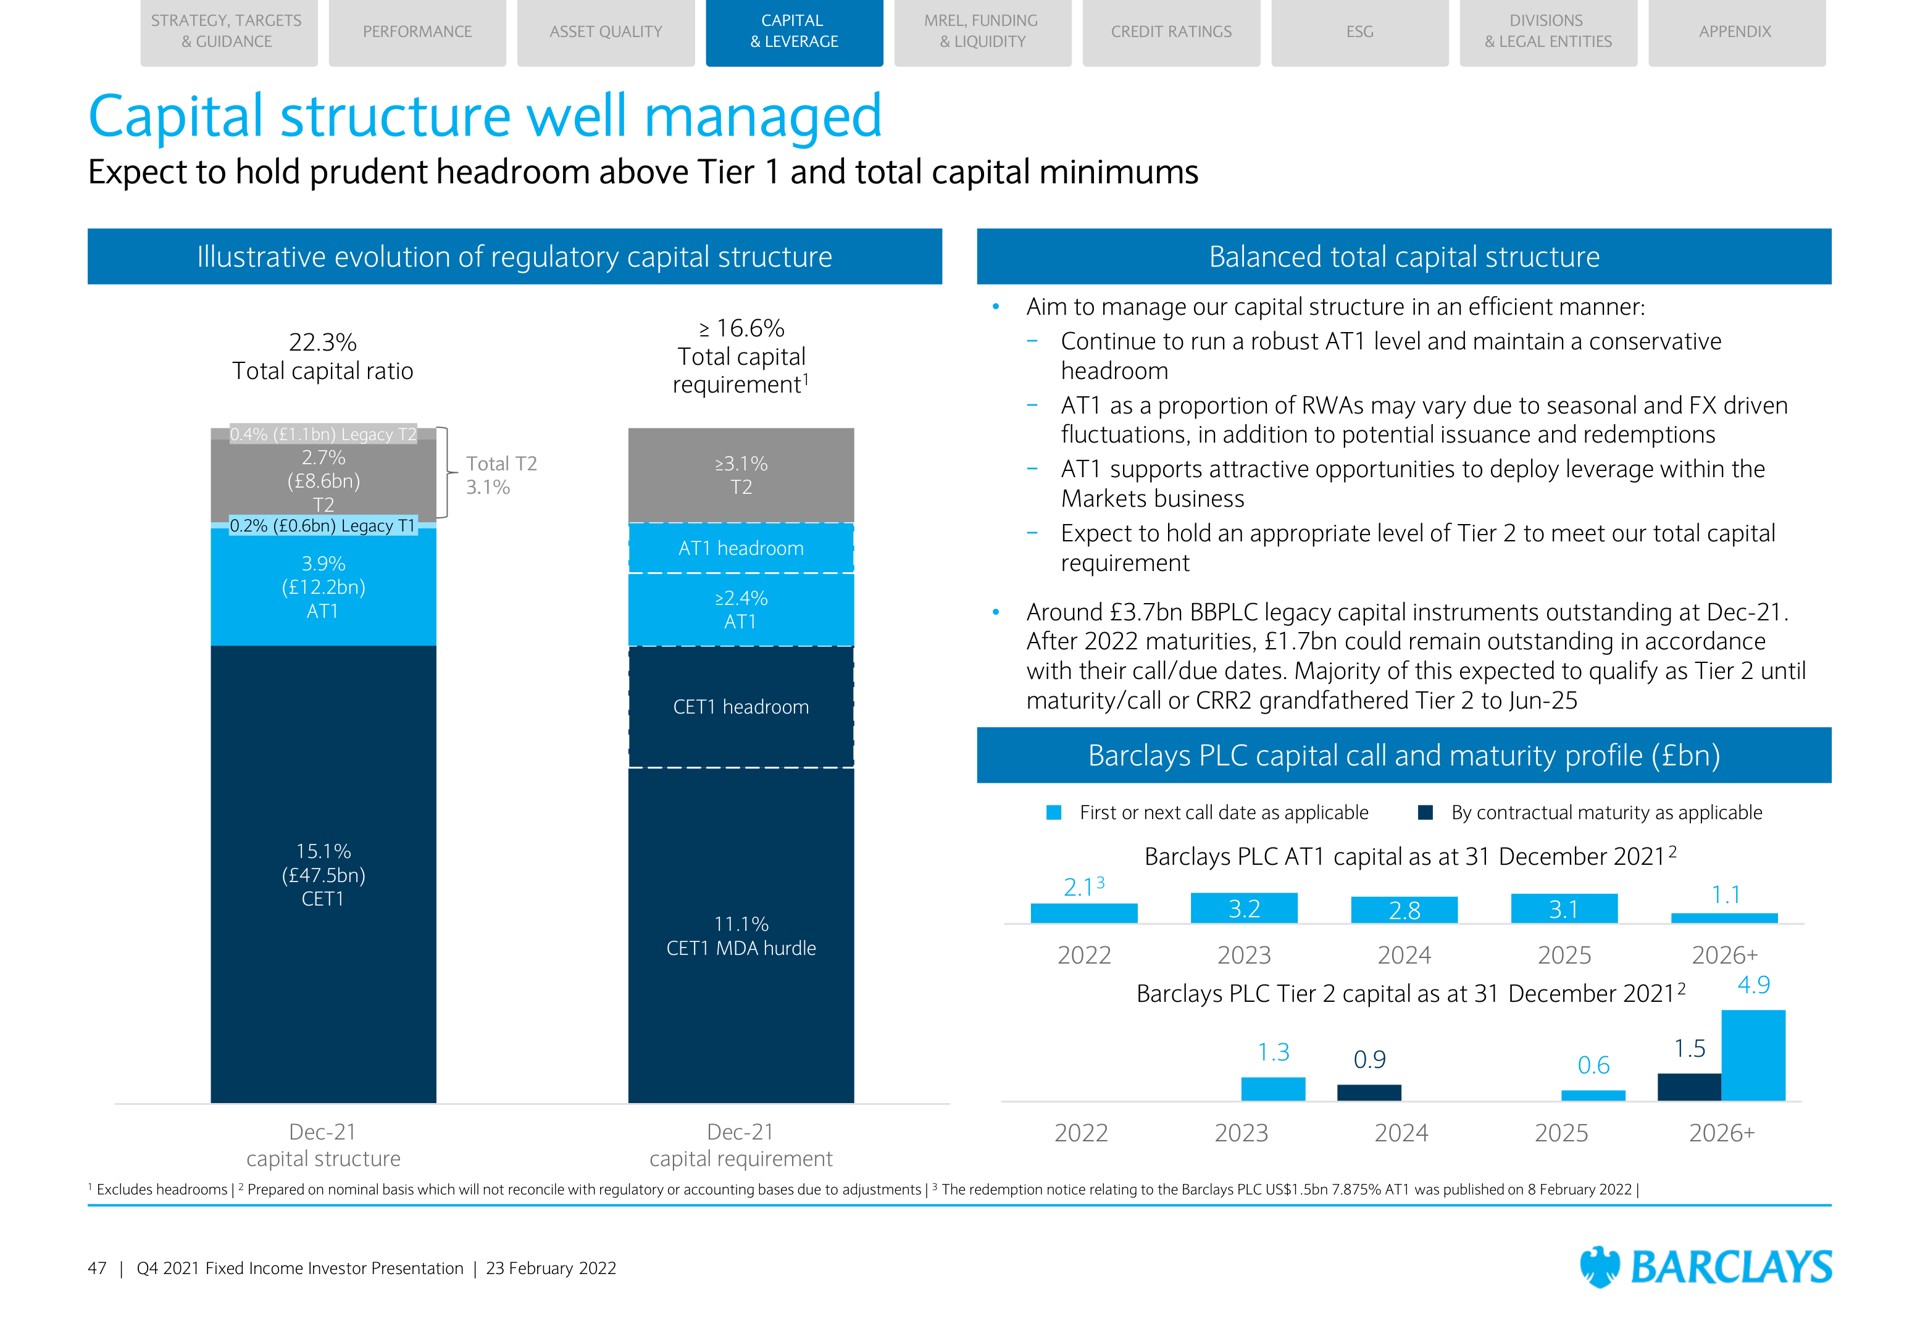 capital structure well managed expect to hold prudent headroom above tier and total capital minimums illustrative evolution of regulatory capital structure balanced total capital structure capital call and maturity profile get abies | Barclays